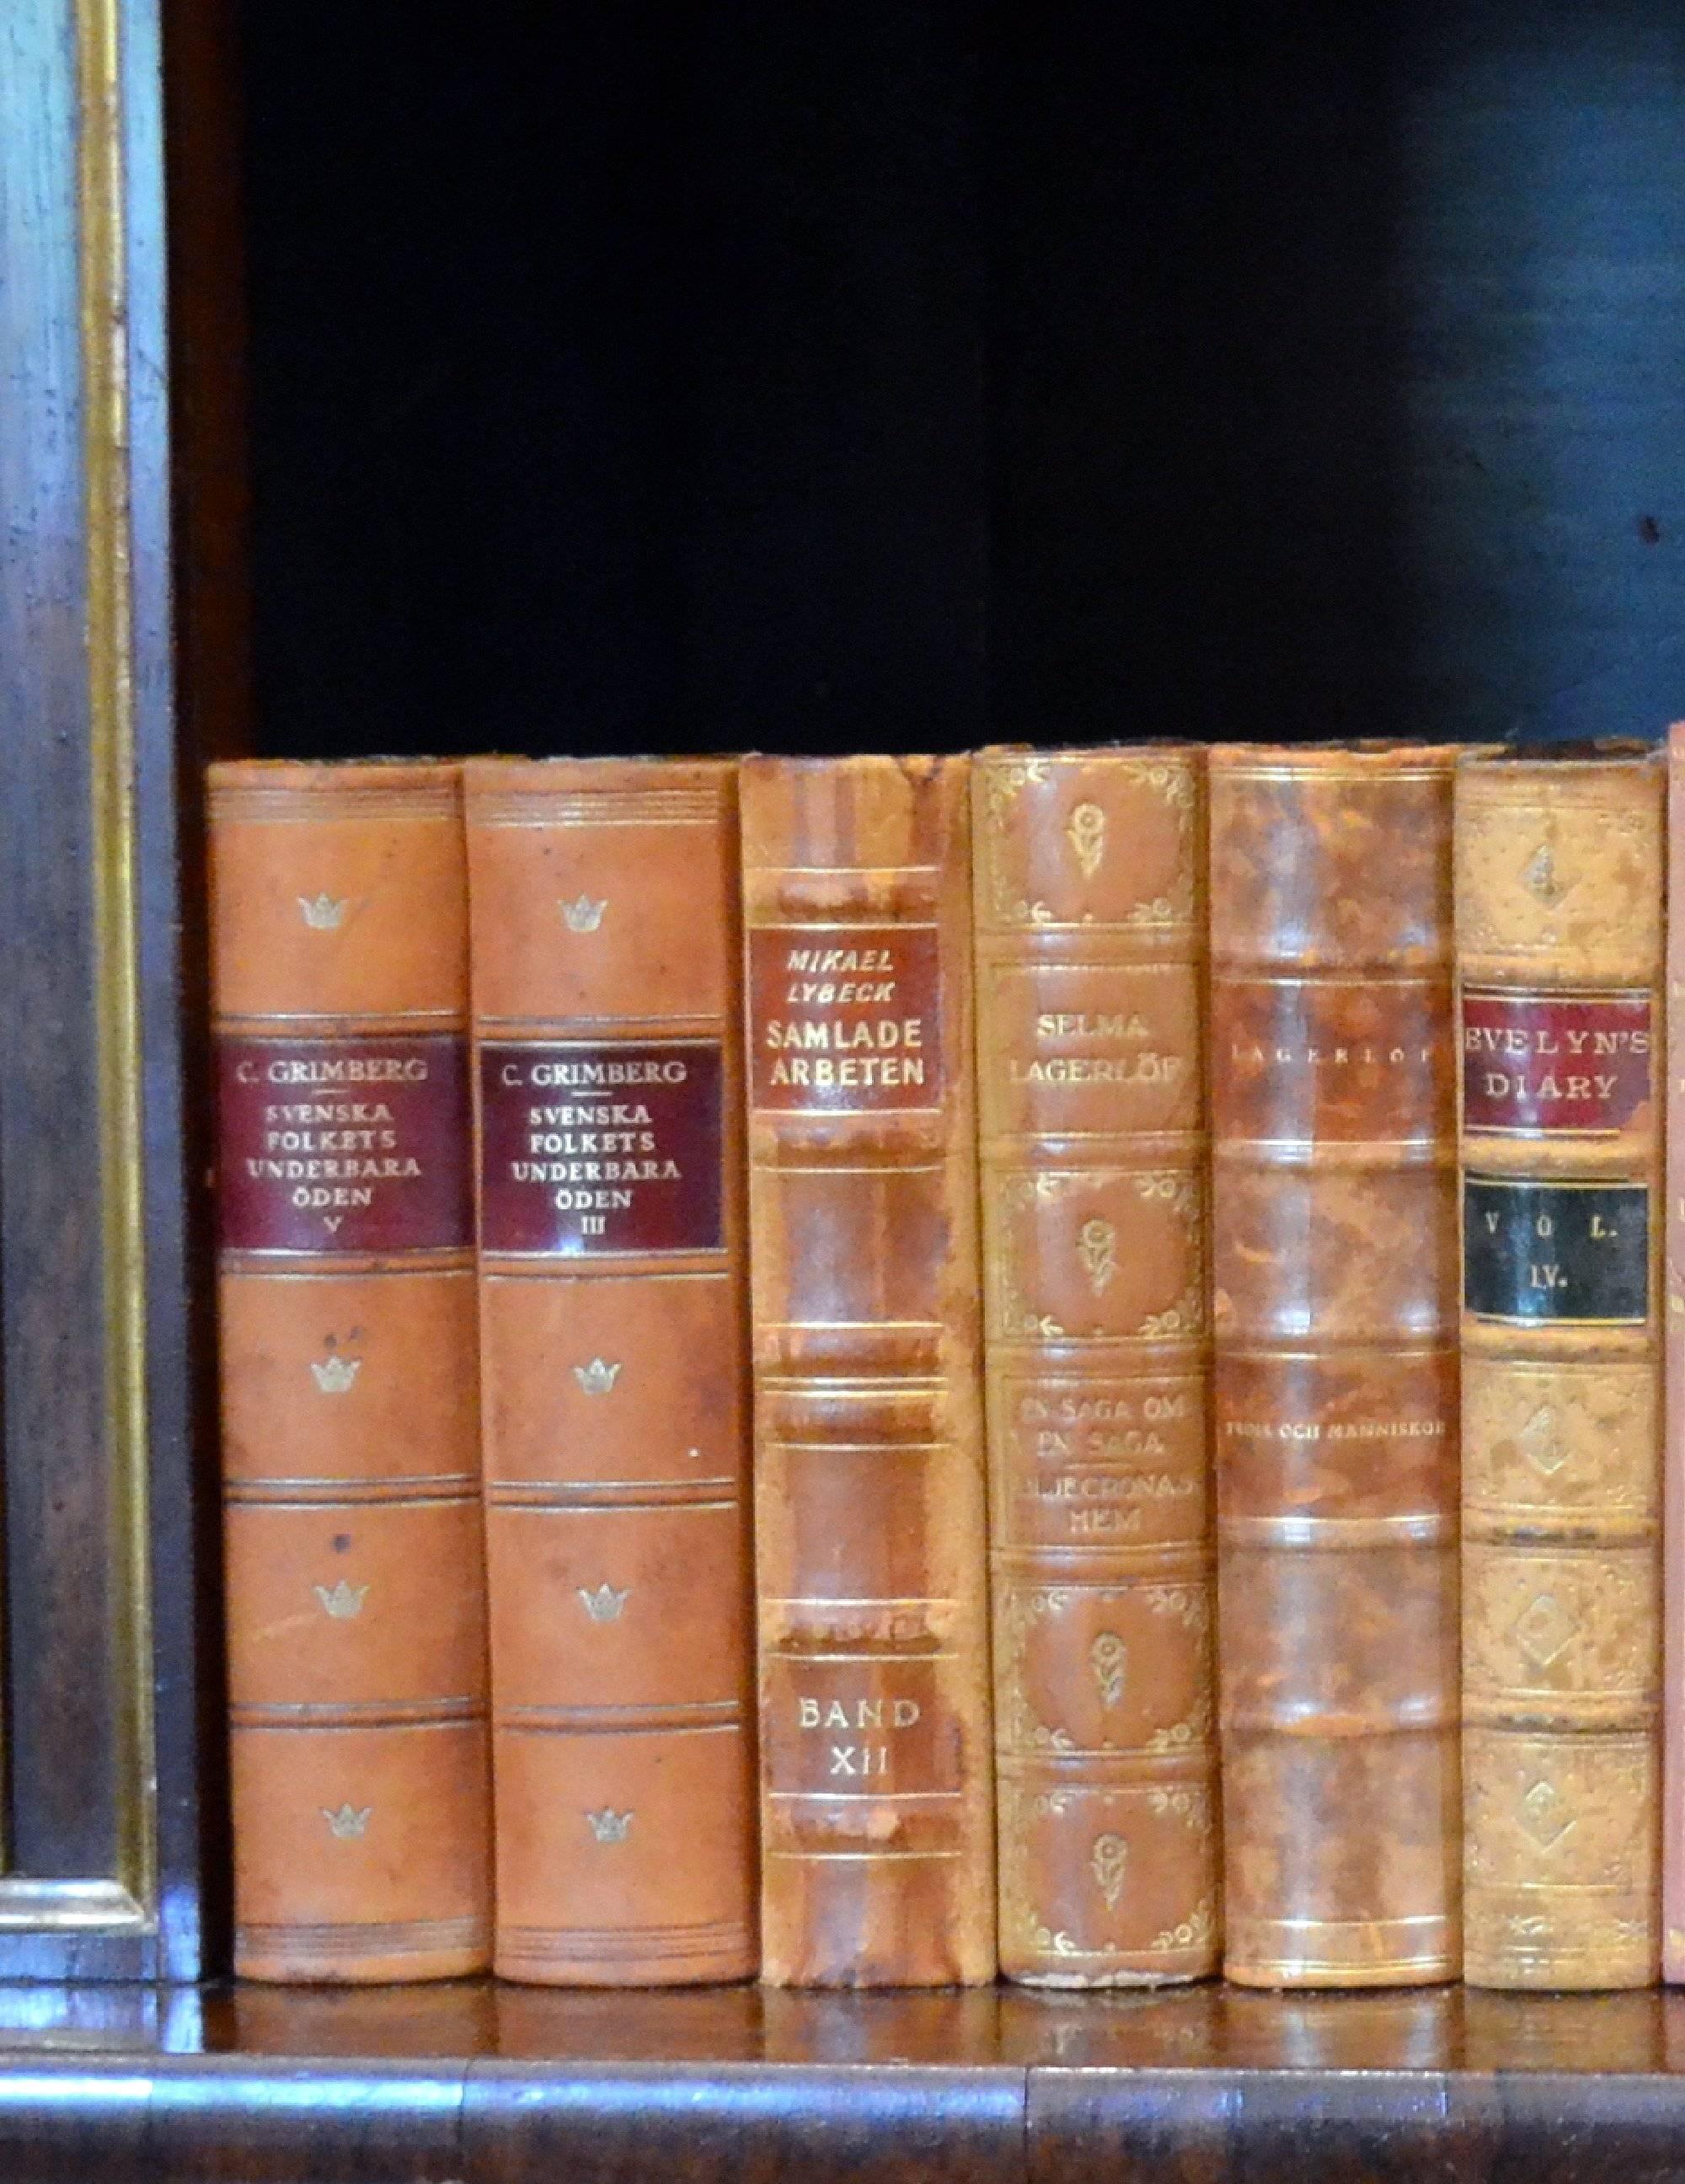 This metre of leather-bound books contains 31 books, in warm rich tones of light brown, tan, yellow gold and orange gold with gold leaf embossing. These books are all in very good condition and would beautifully enhance any bookcase or library.